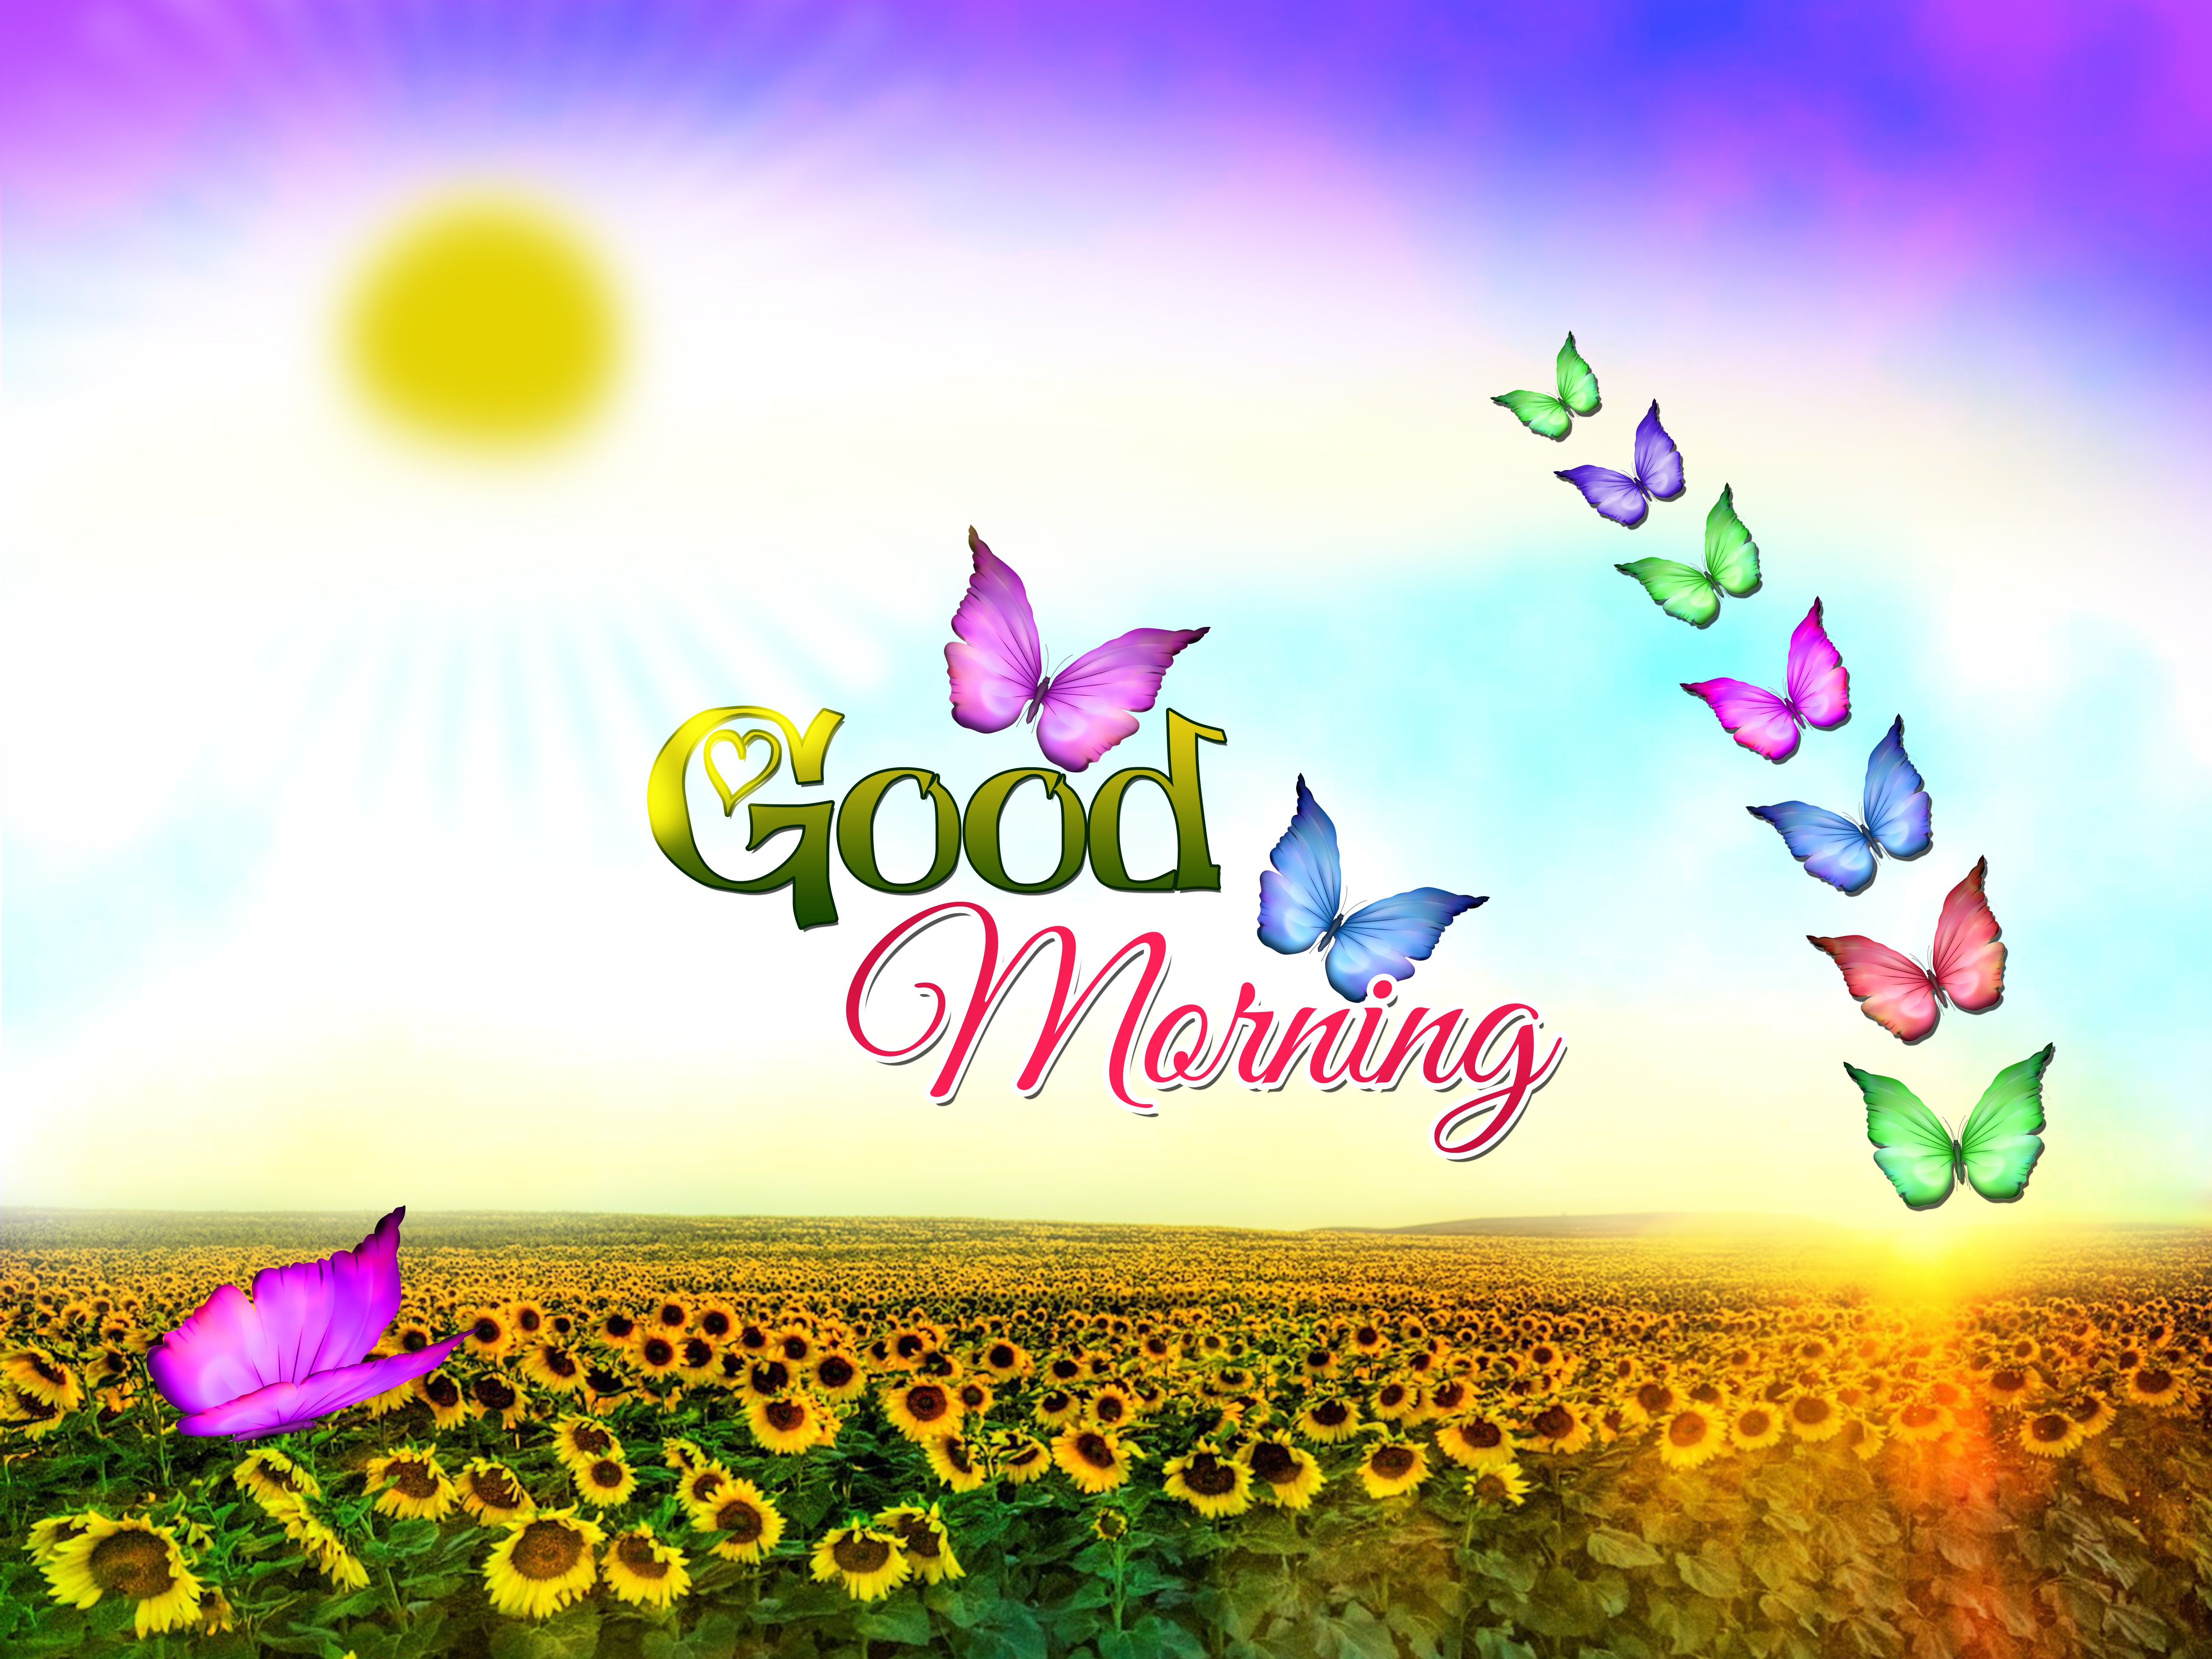 Widescreen Image About Good Morning On Nature Wallpaper High Resolution For